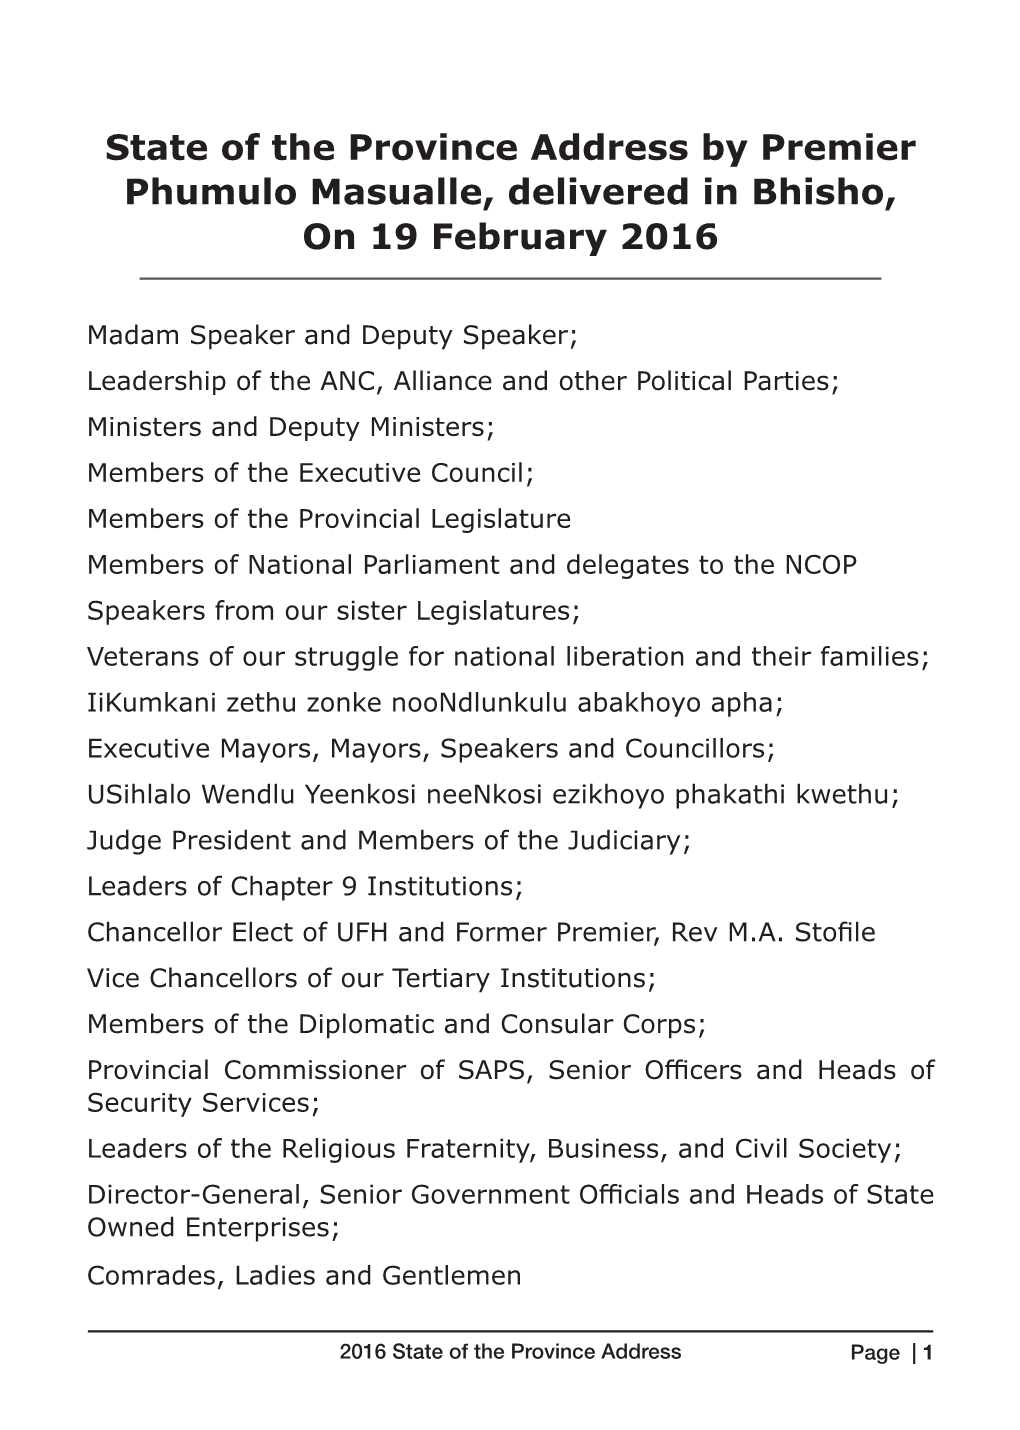 State of the Province Address by Premier Phumulo Masualle, Delivered in Bhisho, on 19 February 2016